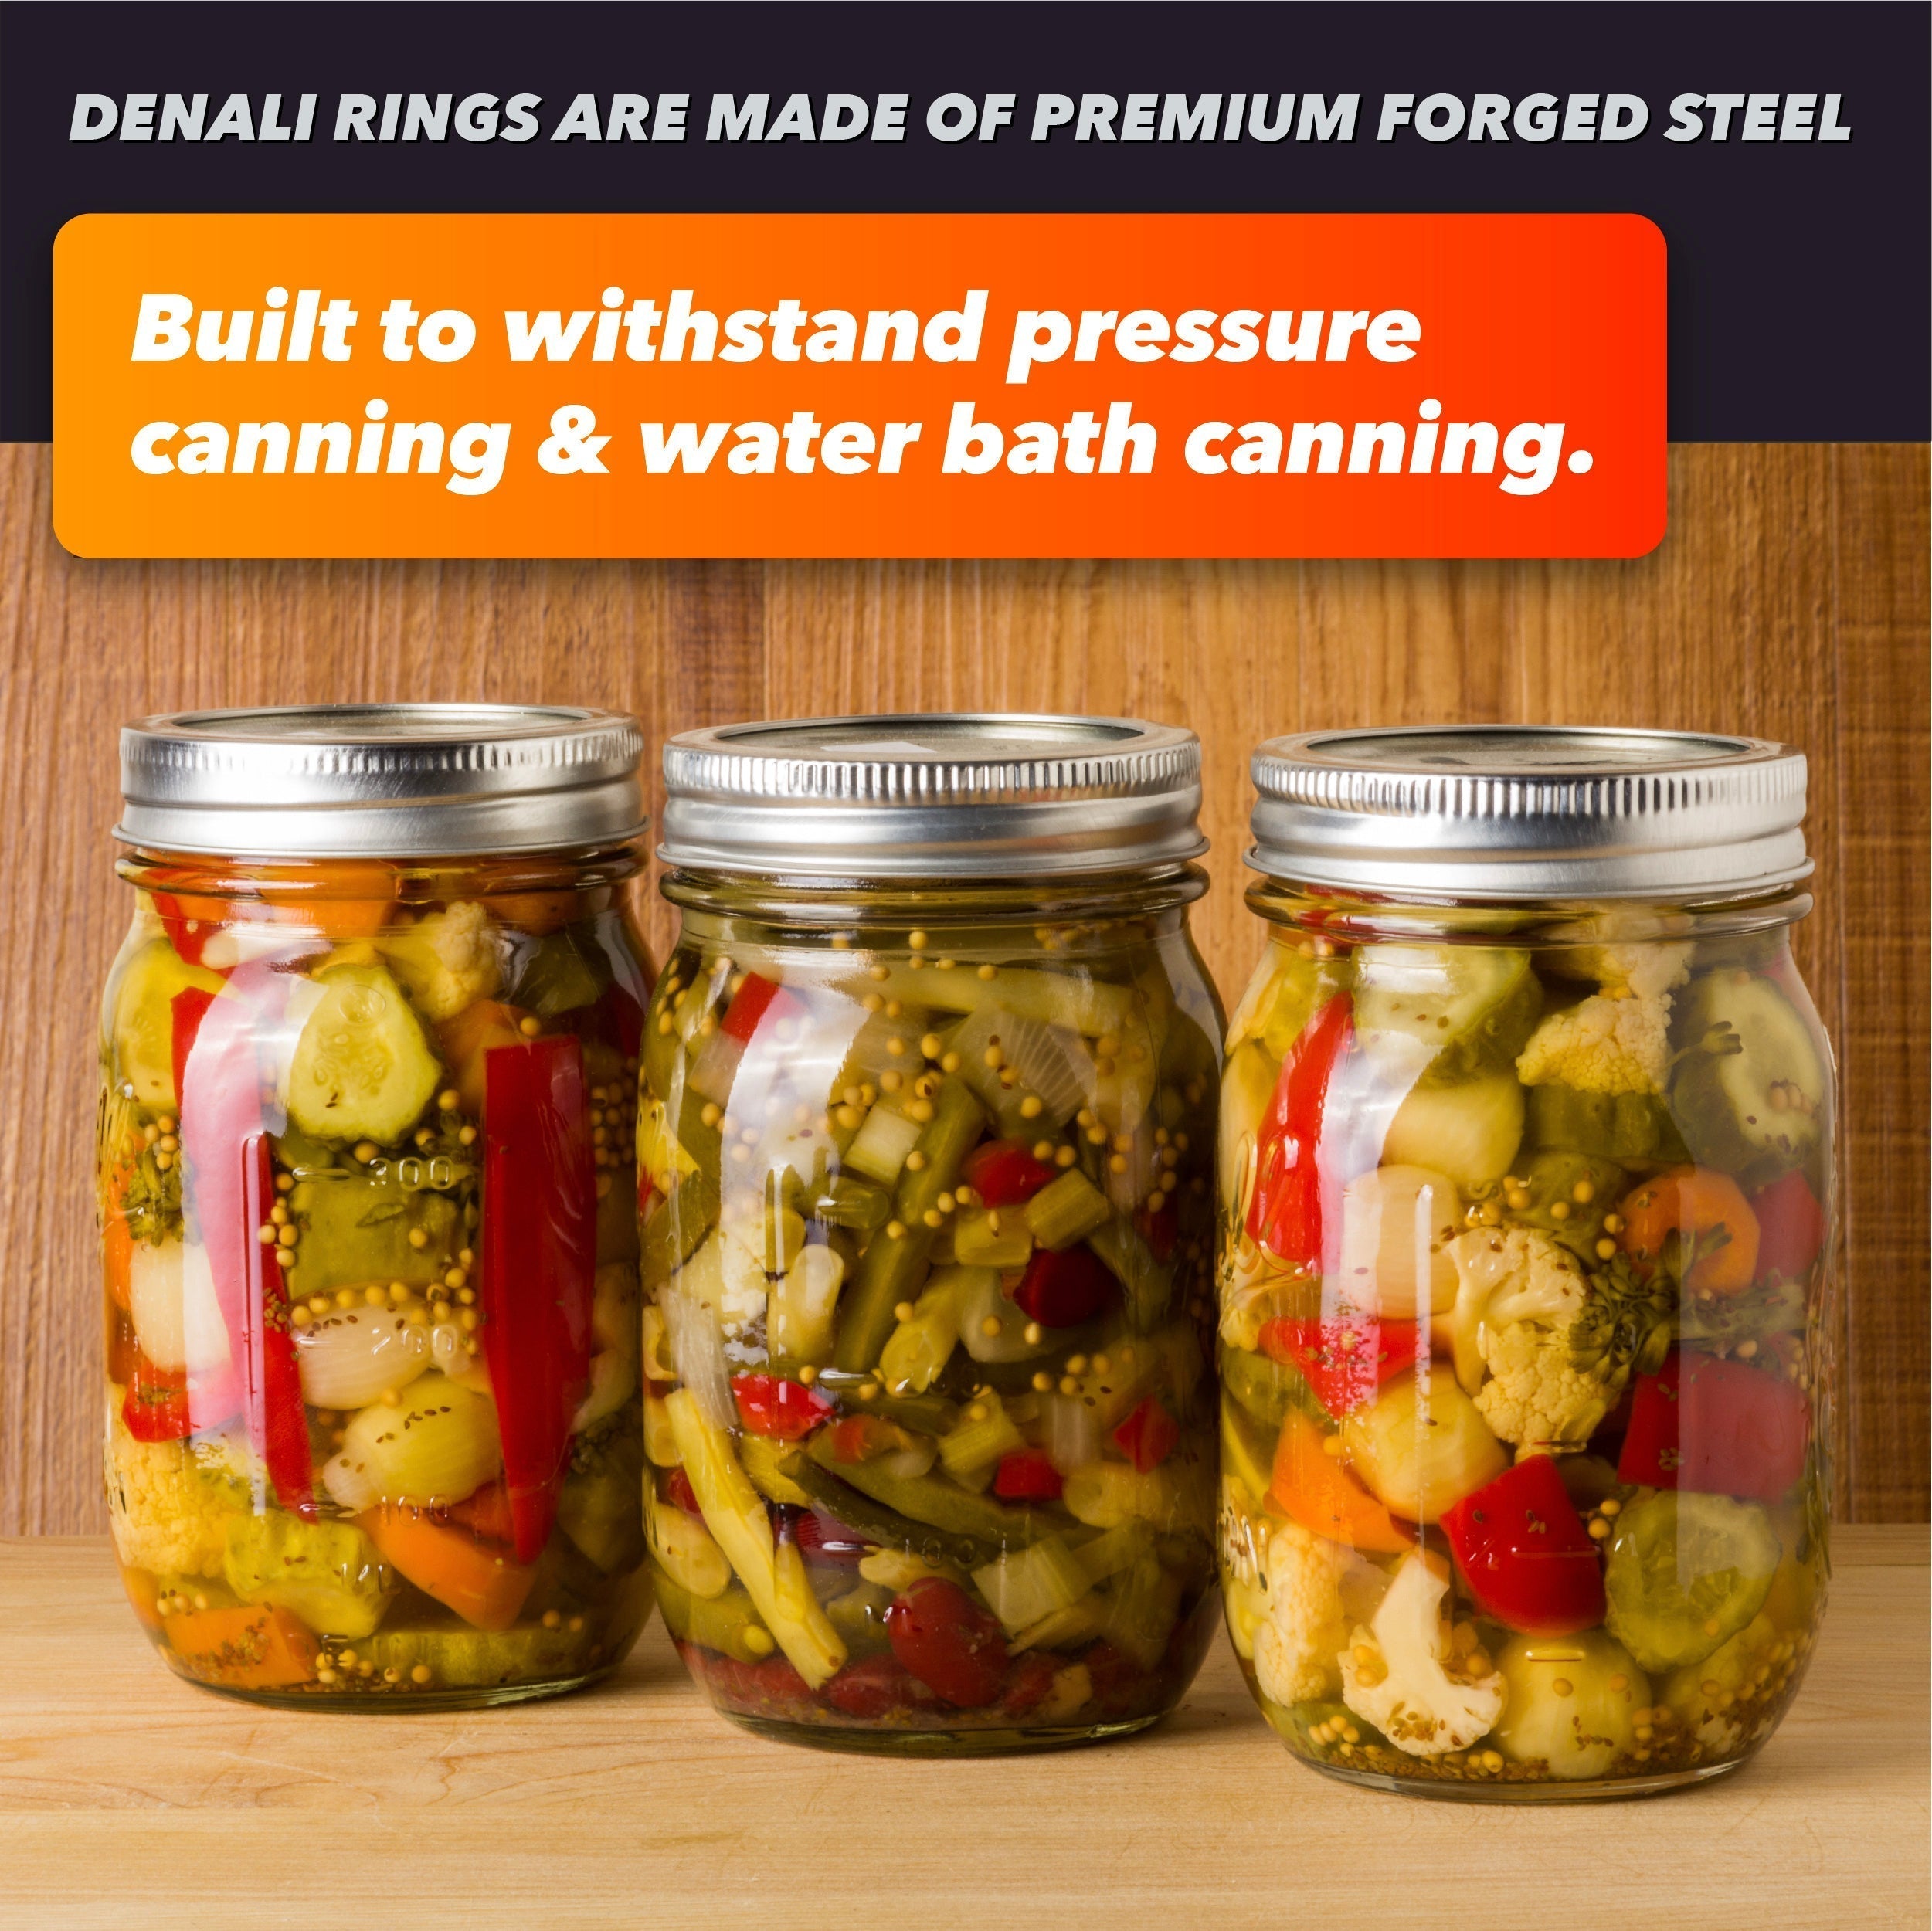 Premium quality forged steel rings for water bath and pressure canning